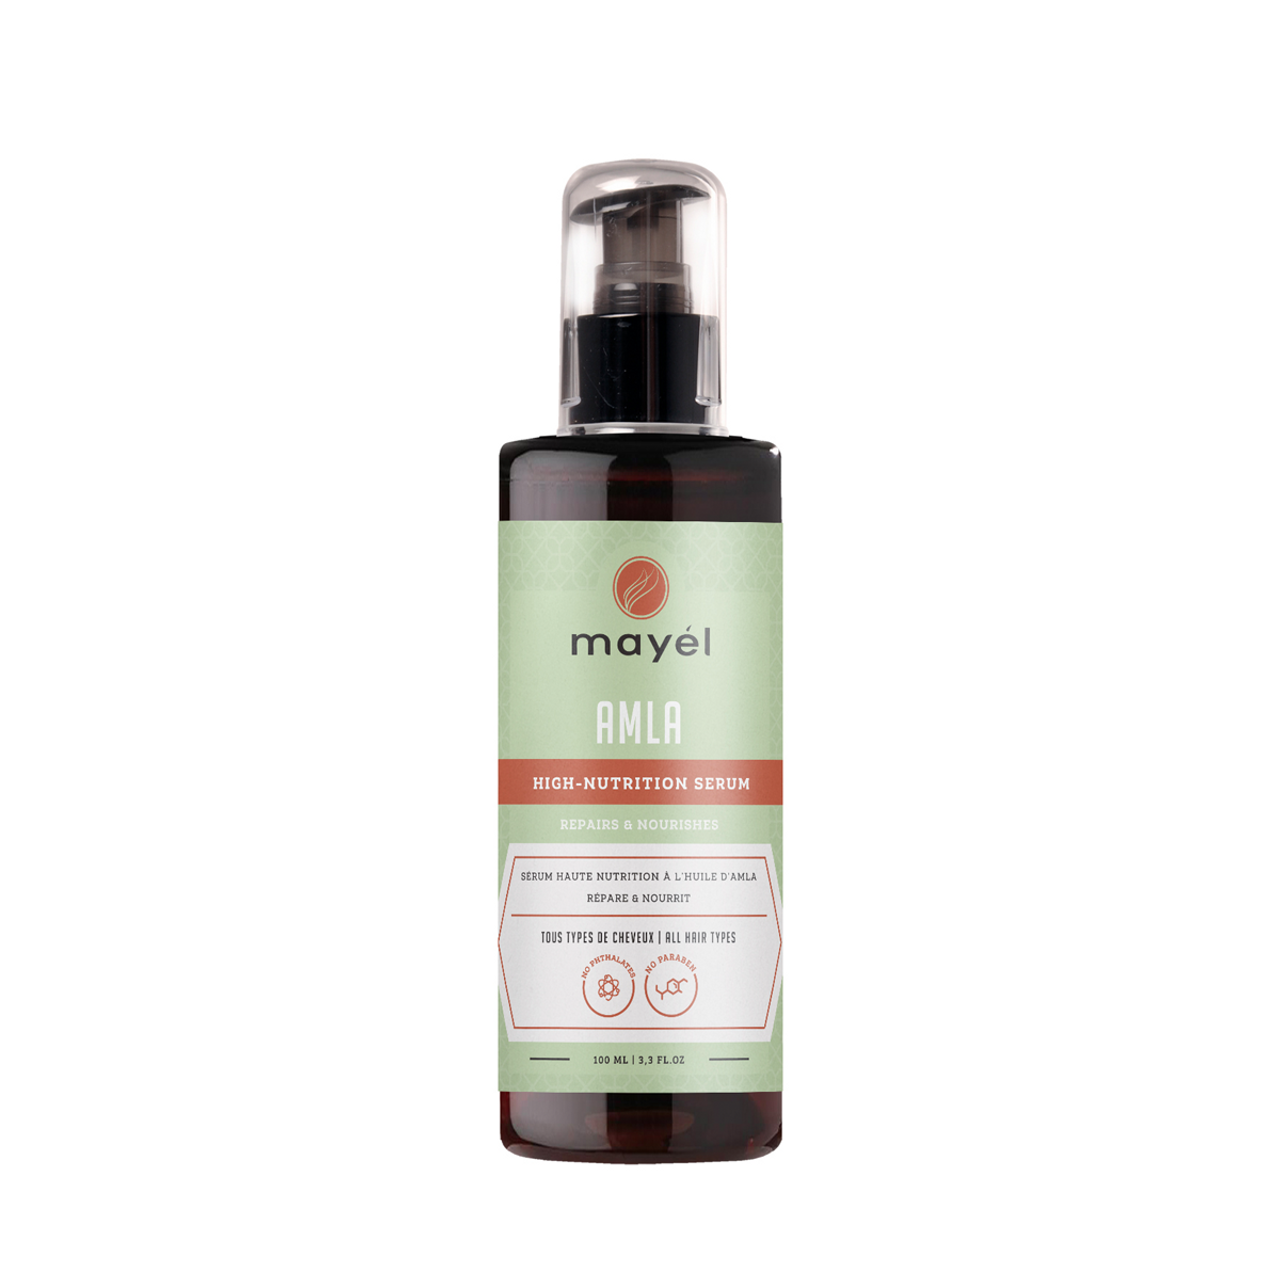 https://cdn11.bigcommerce.com/s-892y3b6fw/images/stencil/1280x1280/products/7059/10510/MAYEL-AMLA-SERUM__07825.1684847626.png?c=1?imbypass=on